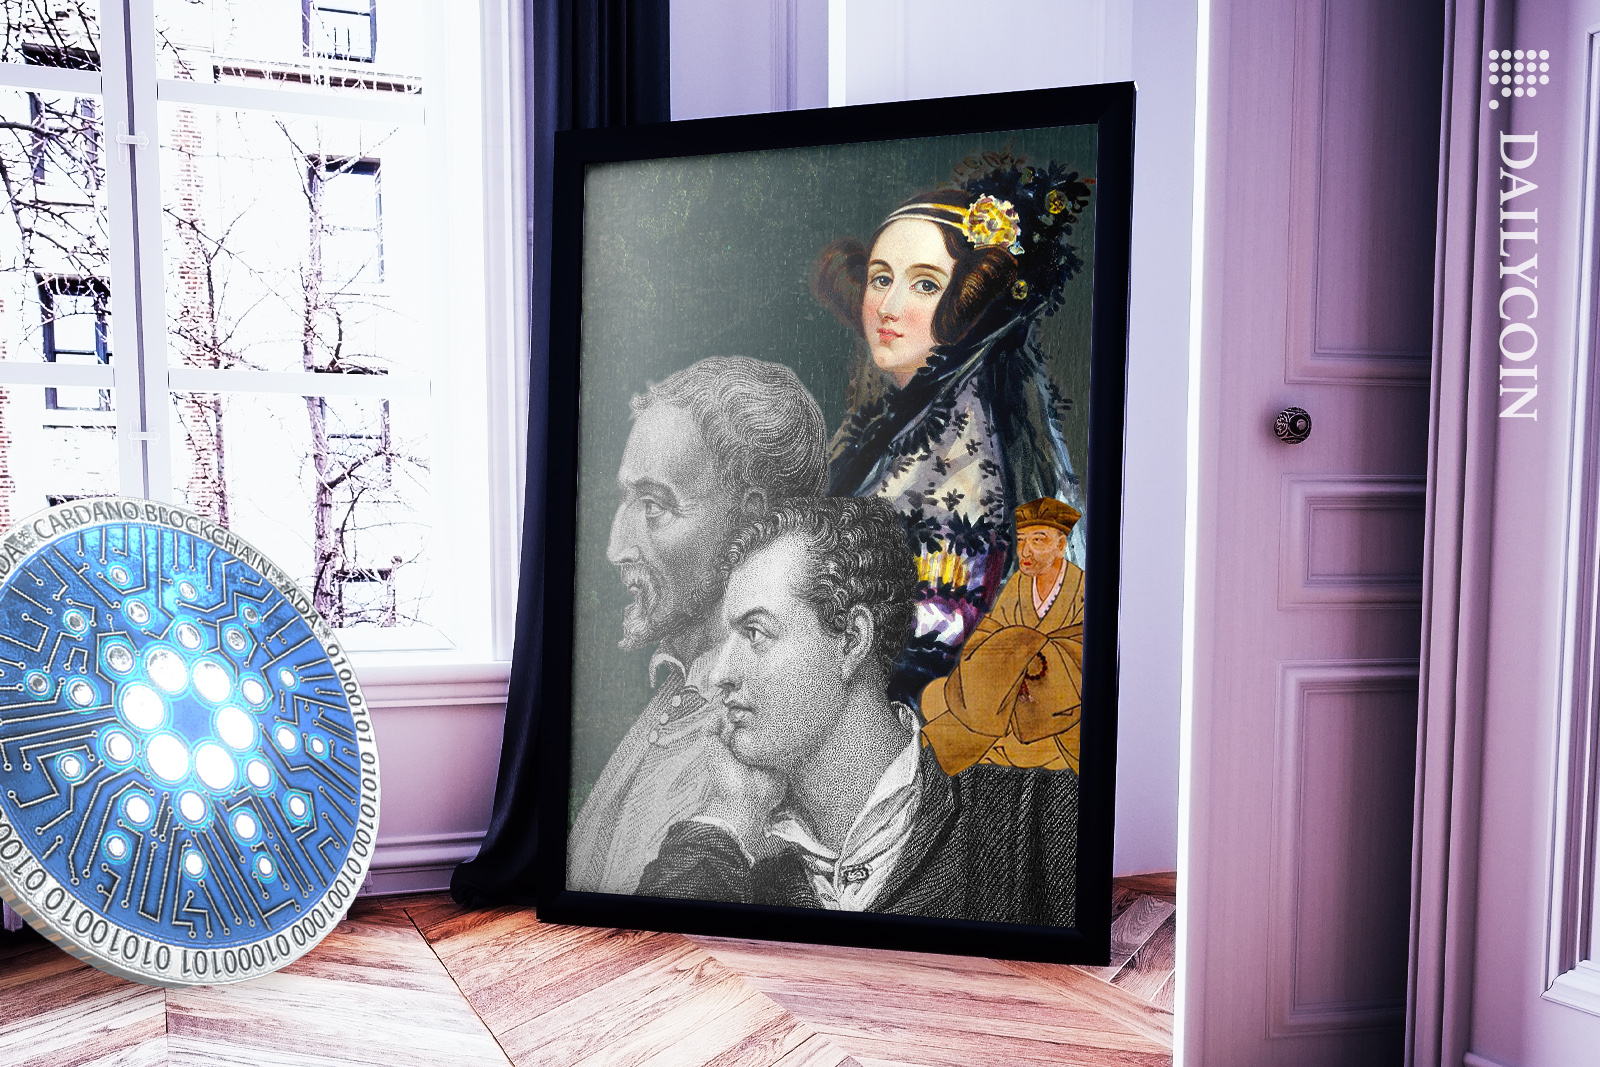 Room with a Cardano coin and a massive painting with Gerolamo Cardano, Ada Lovelace, George Gordon Byron and Matsuo Basho.